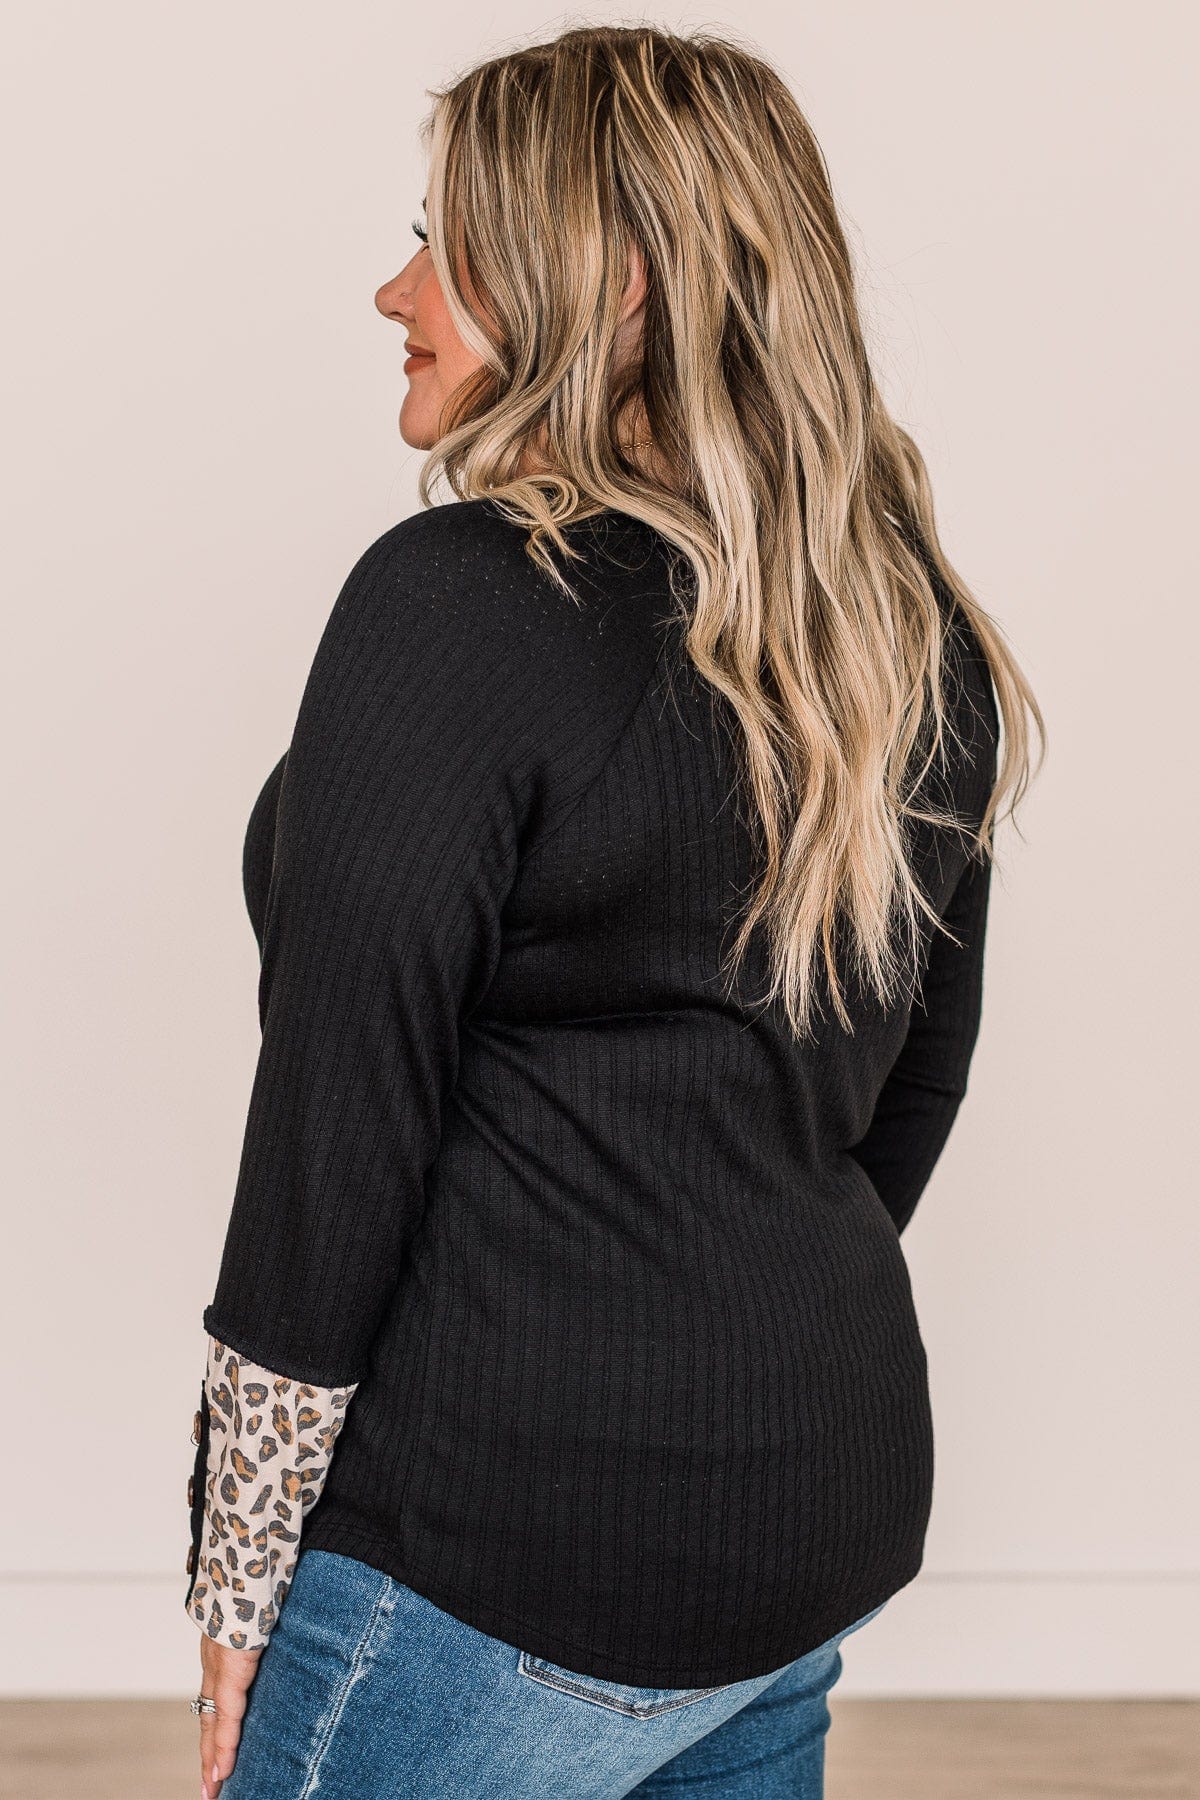 At My Happiest Button Knit Top- Black